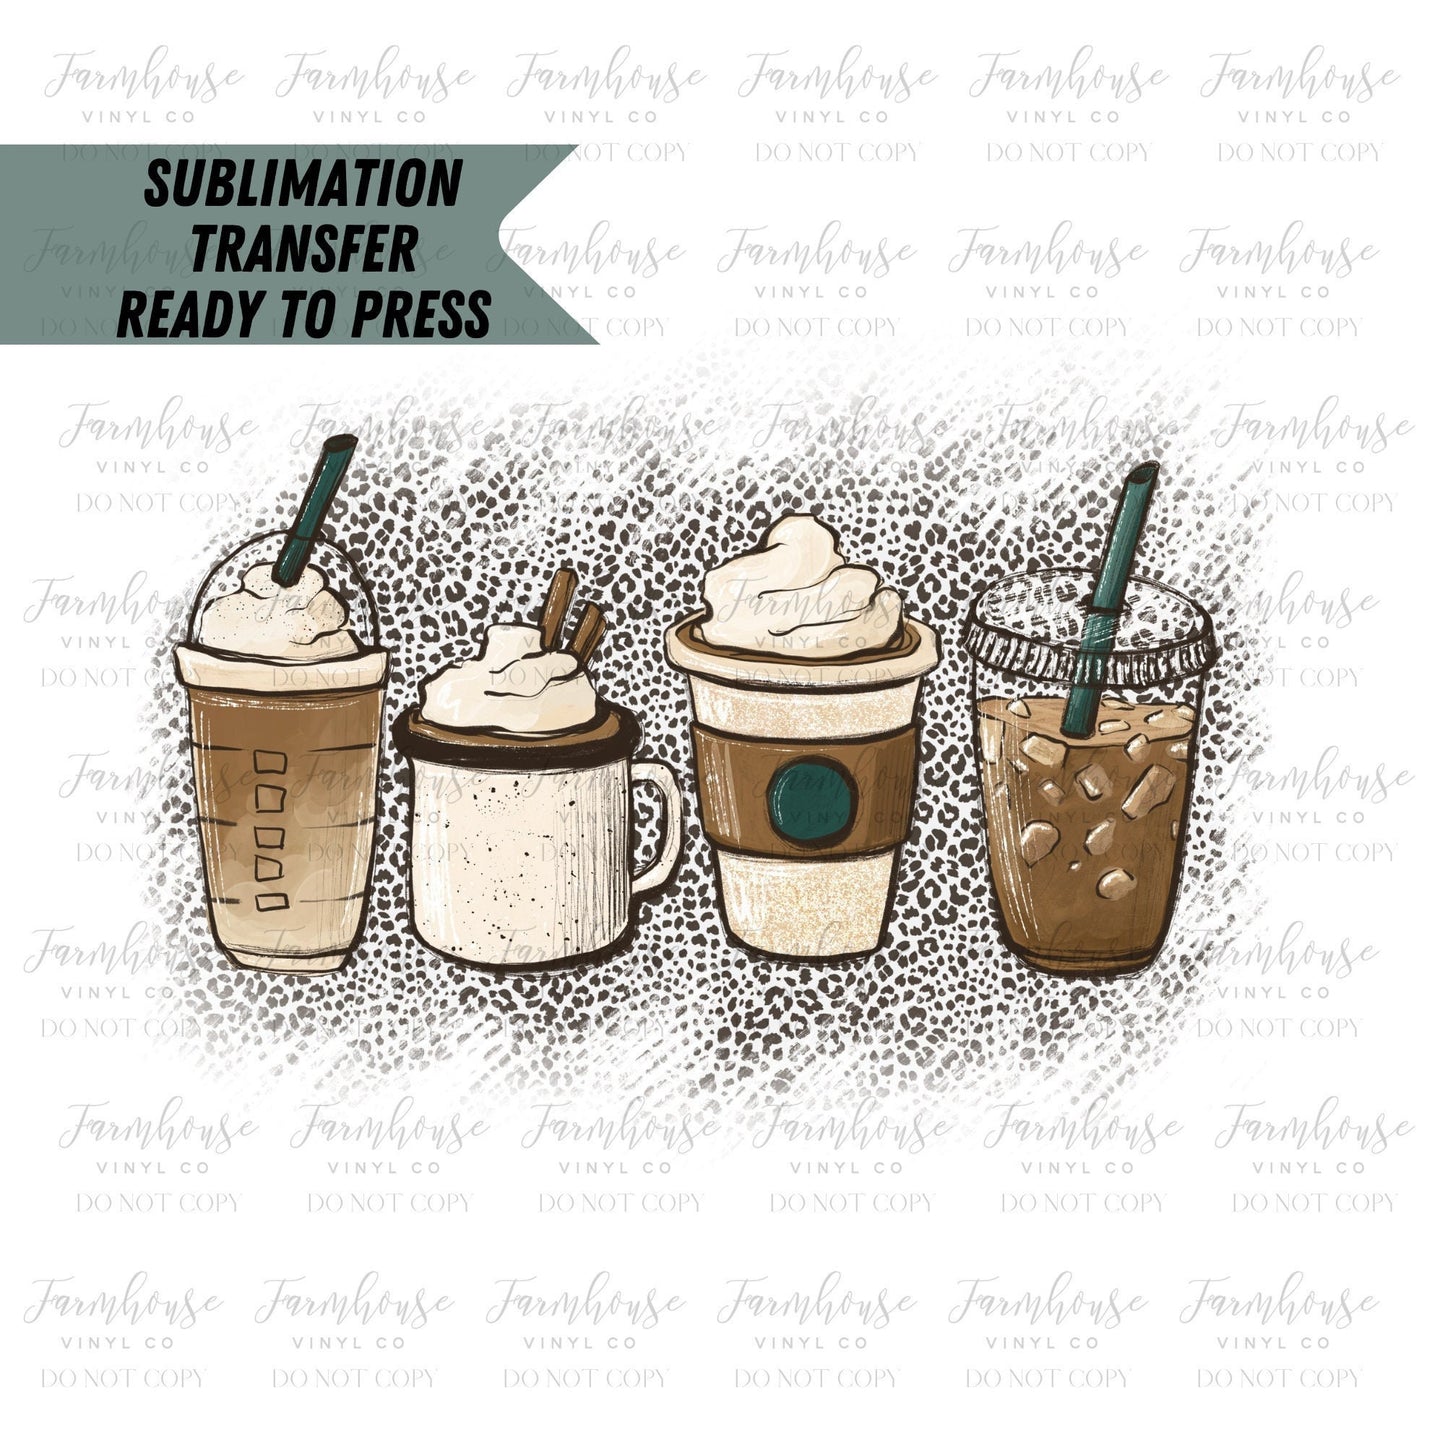 Leopard Coffee Starbies Design, Ready To Press, Sublimation Transfers, Leopard Print, Sublimation, Transfer Ready To Press - Farmhouse Vinyl Co